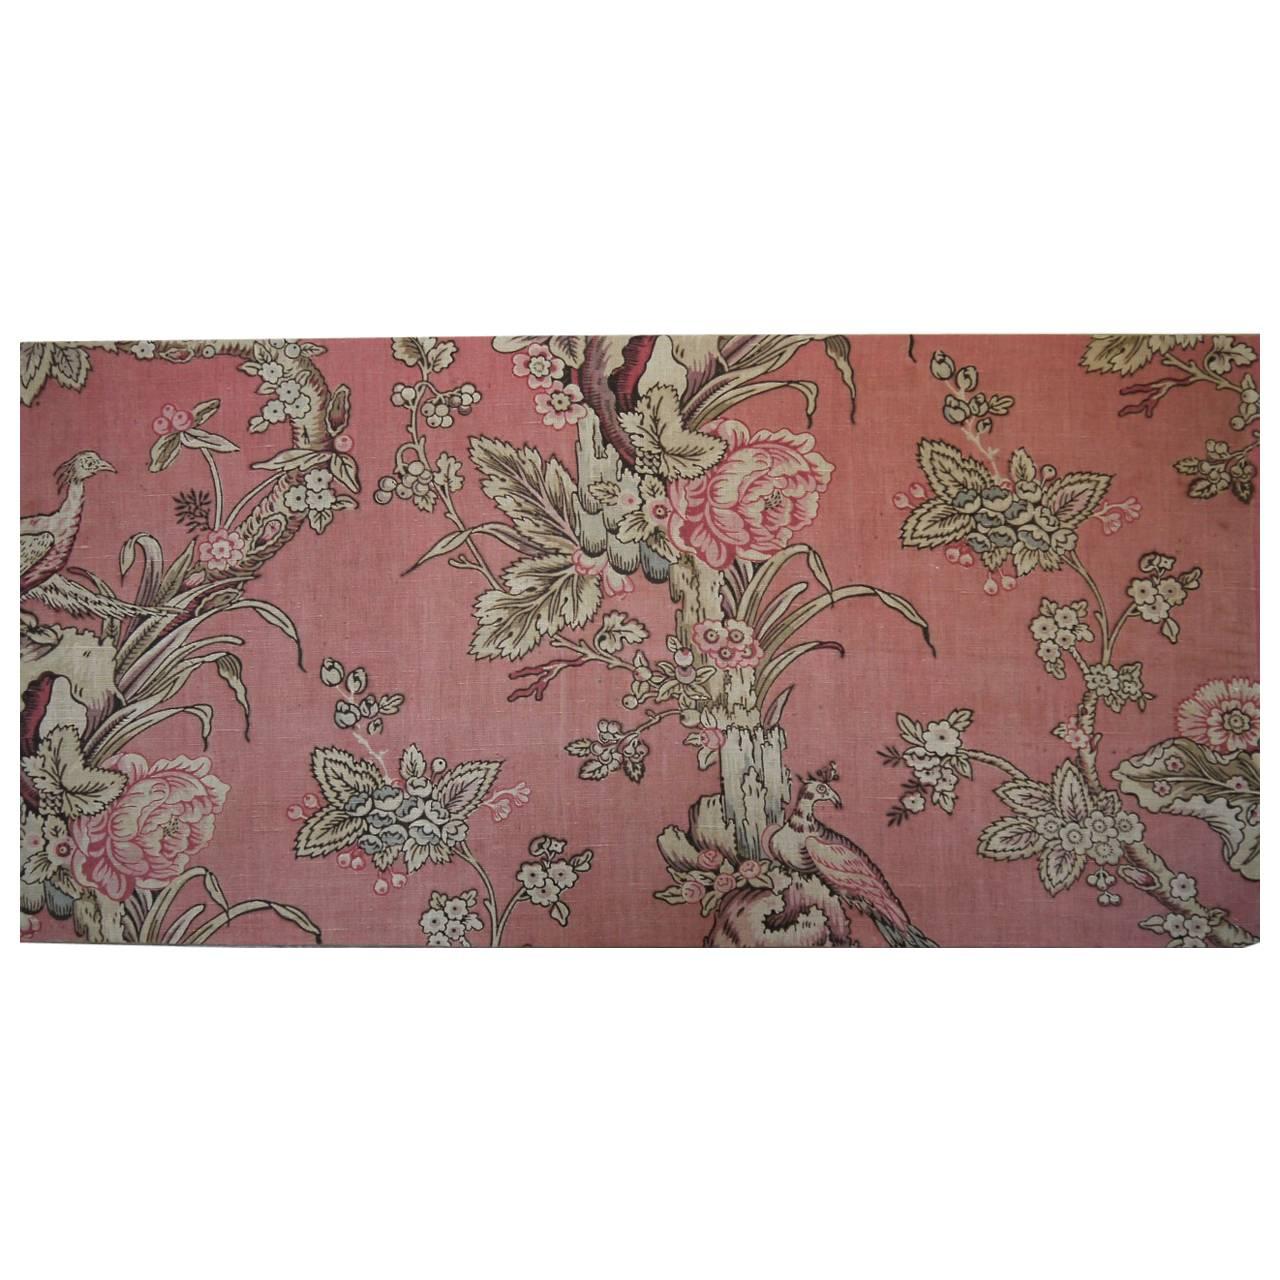  Birds and Roses Dusty Pink Linen Textile on Stretcher French 19th century For Sale